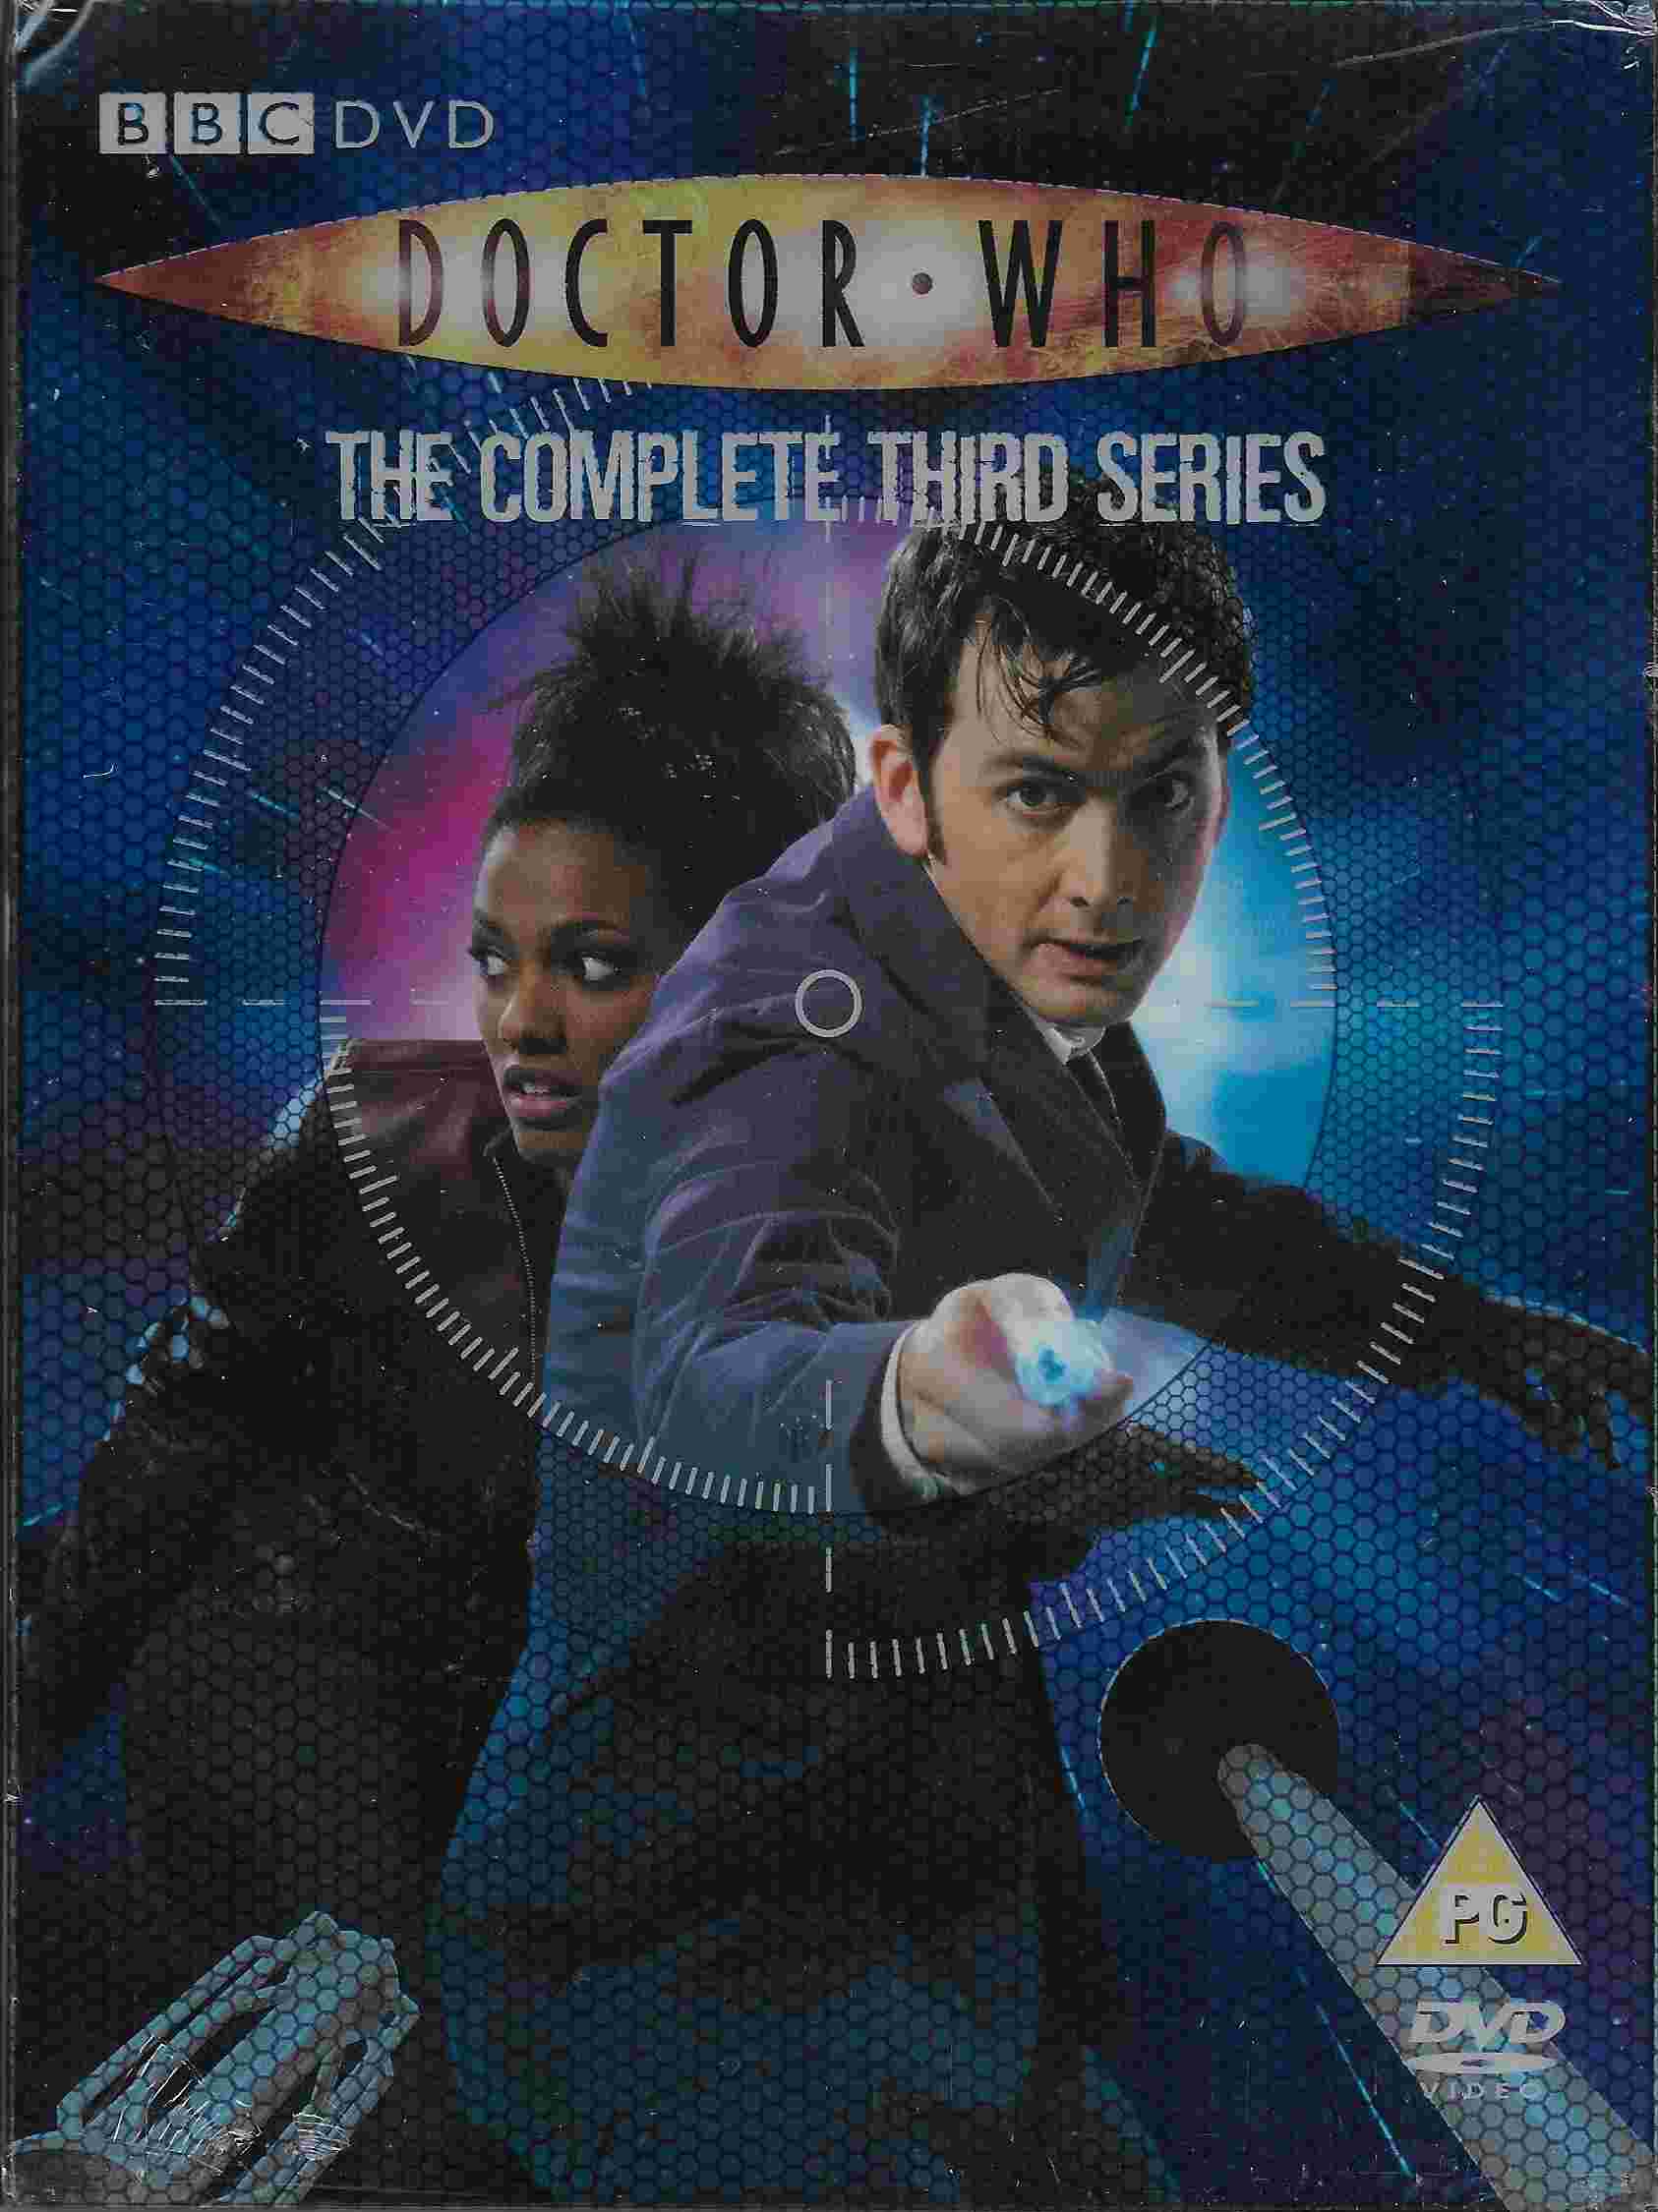 Picture of BBCDVD 2579 Doctor Who - Series 3 boxed set by artist Various from the BBC dvds - Records and Tapes library